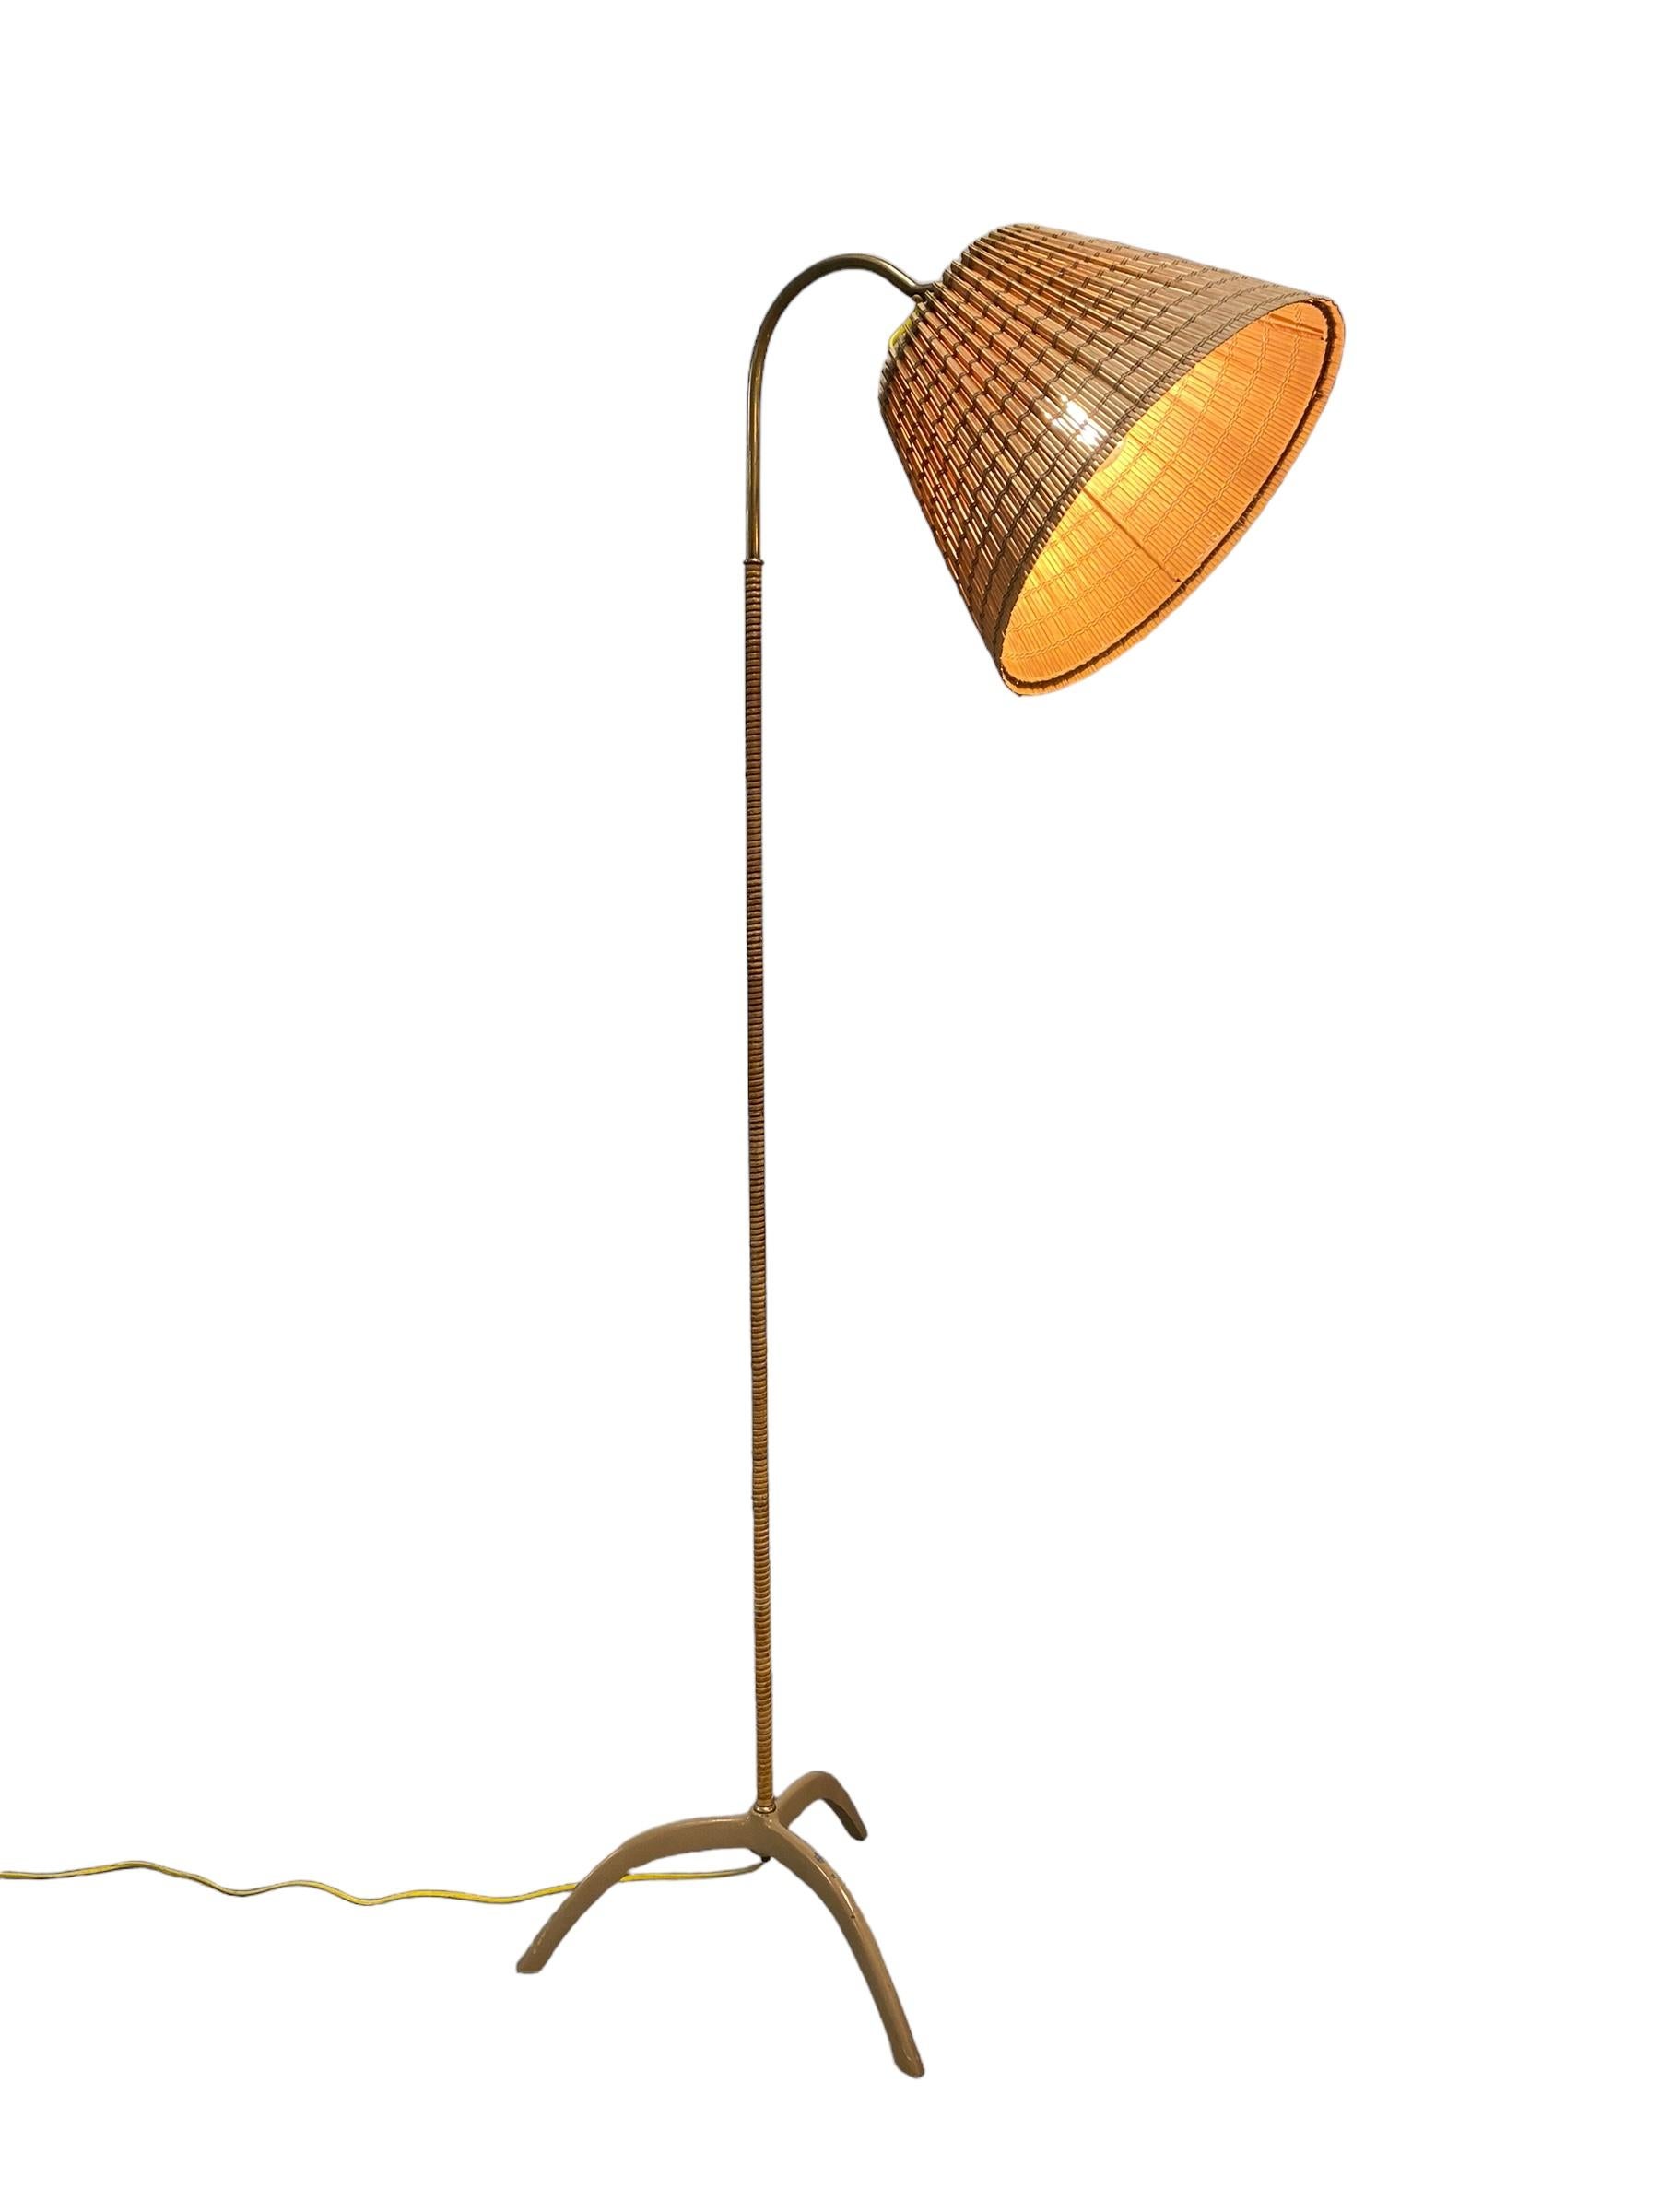 Scandinave moderne Lampadaire Paavo Tynell modèle. 9609, Taito Oy années 1950 en vente